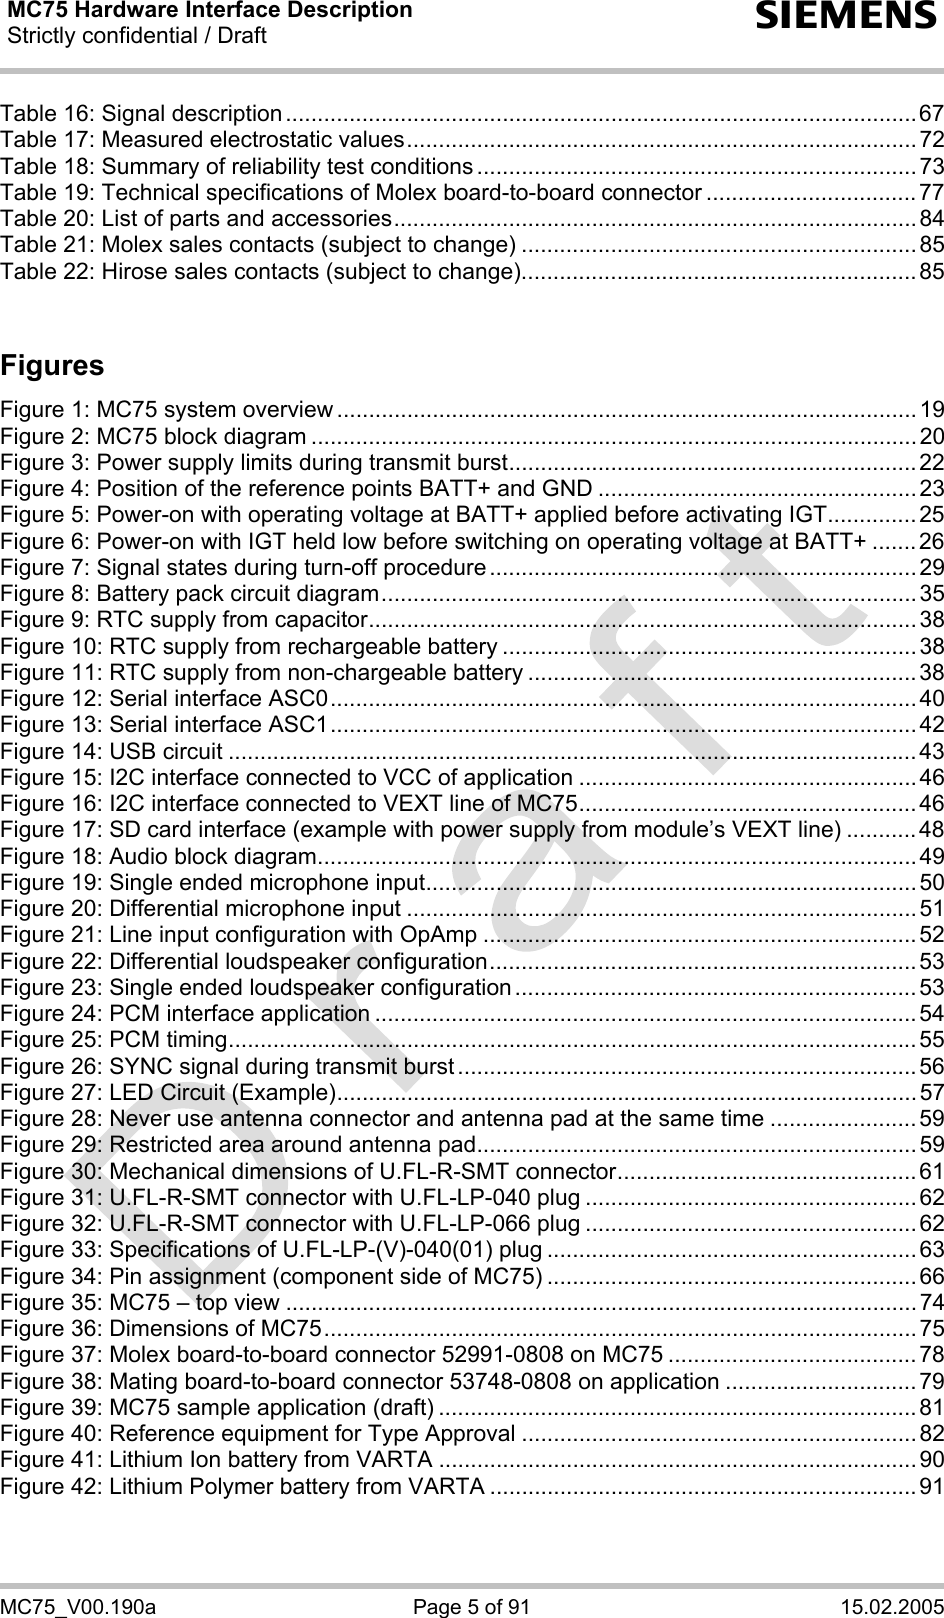 MC75 Hardware Interface Description Strictly confidential / Draft  s MC75_V00.190a  Page 5 of 91  15.02.2005 Table 16: Signal description...................................................................................................67 Table 17: Measured electrostatic values................................................................................72 Table 18: Summary of reliability test conditions ..................................................................... 73 Table 19: Technical specifications of Molex board-to-board connector .................................77 Table 20: List of parts and accessories..................................................................................84 Table 21: Molex sales contacts (subject to change) ..............................................................85 Table 22: Hirose sales contacts (subject to change)..............................................................85  Figures  Figure 1: MC75 system overview ...........................................................................................19 Figure 2: MC75 block diagram ............................................................................................... 20 Figure 3: Power supply limits during transmit burst................................................................ 22 Figure 4: Position of the reference points BATT+ and GND .................................................. 23 Figure 5: Power-on with operating voltage at BATT+ applied before activating IGT.............. 25 Figure 6: Power-on with IGT held low before switching on operating voltage at BATT+ .......26 Figure 7: Signal states during turn-off procedure ...................................................................29 Figure 8: Battery pack circuit diagram....................................................................................35 Figure 9: RTC supply from capacitor...................................................................................... 38 Figure 10: RTC supply from rechargeable battery .................................................................38 Figure 11: RTC supply from non-chargeable battery .............................................................38 Figure 12: Serial interface ASC0............................................................................................ 40 Figure 13: Serial interface ASC1............................................................................................ 42 Figure 14: USB circuit ............................................................................................................43 Figure 15: I2C interface connected to VCC of application ..................................................... 46 Figure 16: I2C interface connected to VEXT line of MC75..................................................... 46 Figure 17: SD card interface (example with power supply from module’s VEXT line) ........... 48 Figure 18: Audio block diagram.............................................................................................. 49 Figure 19: Single ended microphone input............................................................................. 50 Figure 20: Differential microphone input ................................................................................ 51 Figure 21: Line input configuration with OpAmp .................................................................... 52 Figure 22: Differential loudspeaker configuration...................................................................53 Figure 23: Single ended loudspeaker configuration............................................................... 53 Figure 24: PCM interface application ..................................................................................... 54 Figure 25: PCM timing............................................................................................................ 55 Figure 26: SYNC signal during transmit burst ........................................................................ 56 Figure 27: LED Circuit (Example)...........................................................................................57 Figure 28: Never use antenna connector and antenna pad at the same time ....................... 59 Figure 29: Restricted area around antenna pad..................................................................... 59 Figure 30: Mechanical dimensions of U.FL-R-SMT connector...............................................61 Figure 31: U.FL-R-SMT connector with U.FL-LP-040 plug ....................................................62 Figure 32: U.FL-R-SMT connector with U.FL-LP-066 plug ....................................................62 Figure 33: Specifications of U.FL-LP-(V)-040(01) plug .......................................................... 63 Figure 34: Pin assignment (component side of MC75) .......................................................... 66 Figure 35: MC75 – top view ................................................................................................... 74 Figure 36: Dimensions of MC75............................................................................................. 75 Figure 37: Molex board-to-board connector 52991-0808 on MC75 .......................................78 Figure 38: Mating board-to-board connector 53748-0808 on application .............................. 79 Figure 39: MC75 sample application (draft) ........................................................................... 81 Figure 40: Reference equipment for Type Approval ..............................................................82 Figure 41: Lithium Ion battery from VARTA ...........................................................................90 Figure 42: Lithium Polymer battery from VARTA ................................................................... 91  